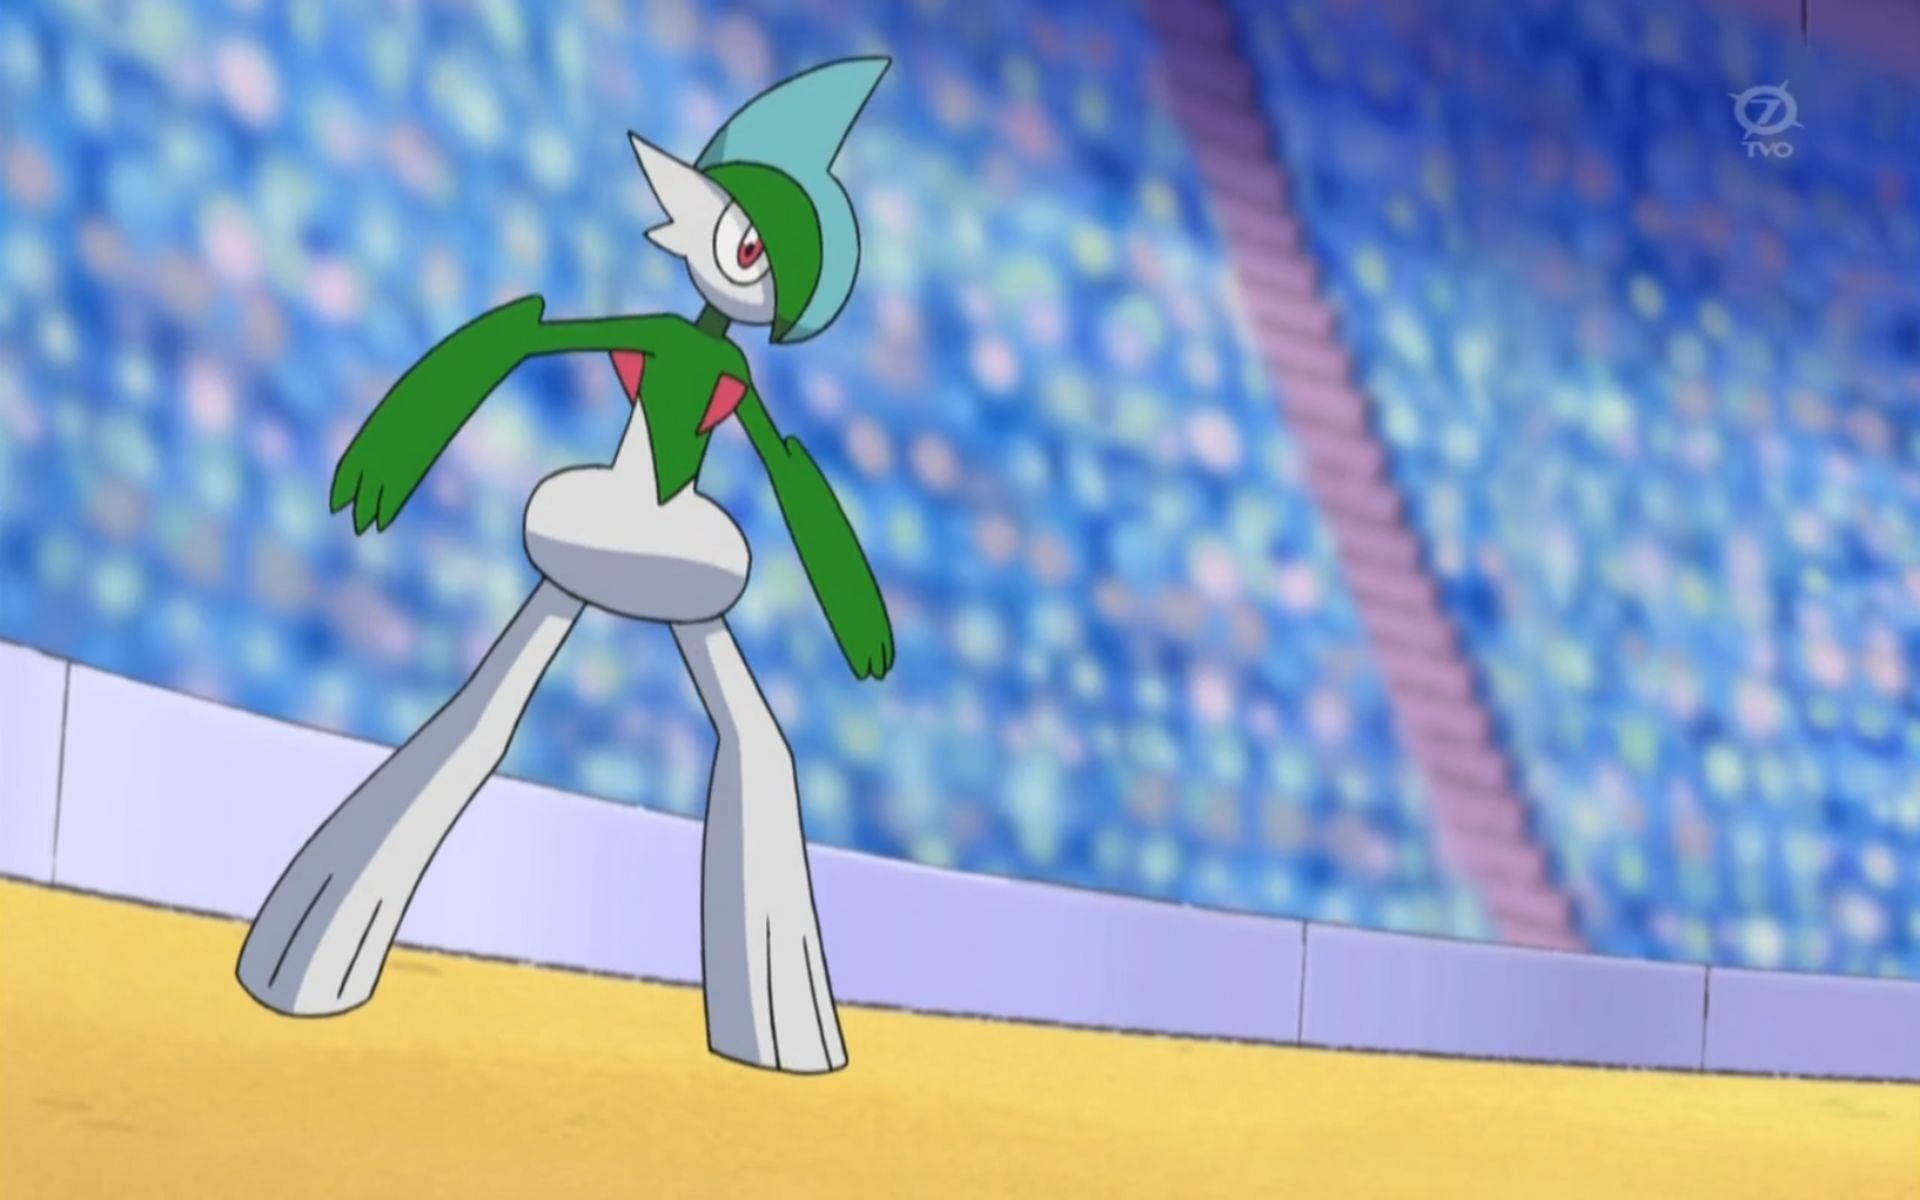 The best moveset for Gallade in Pokemon GO in 2022.